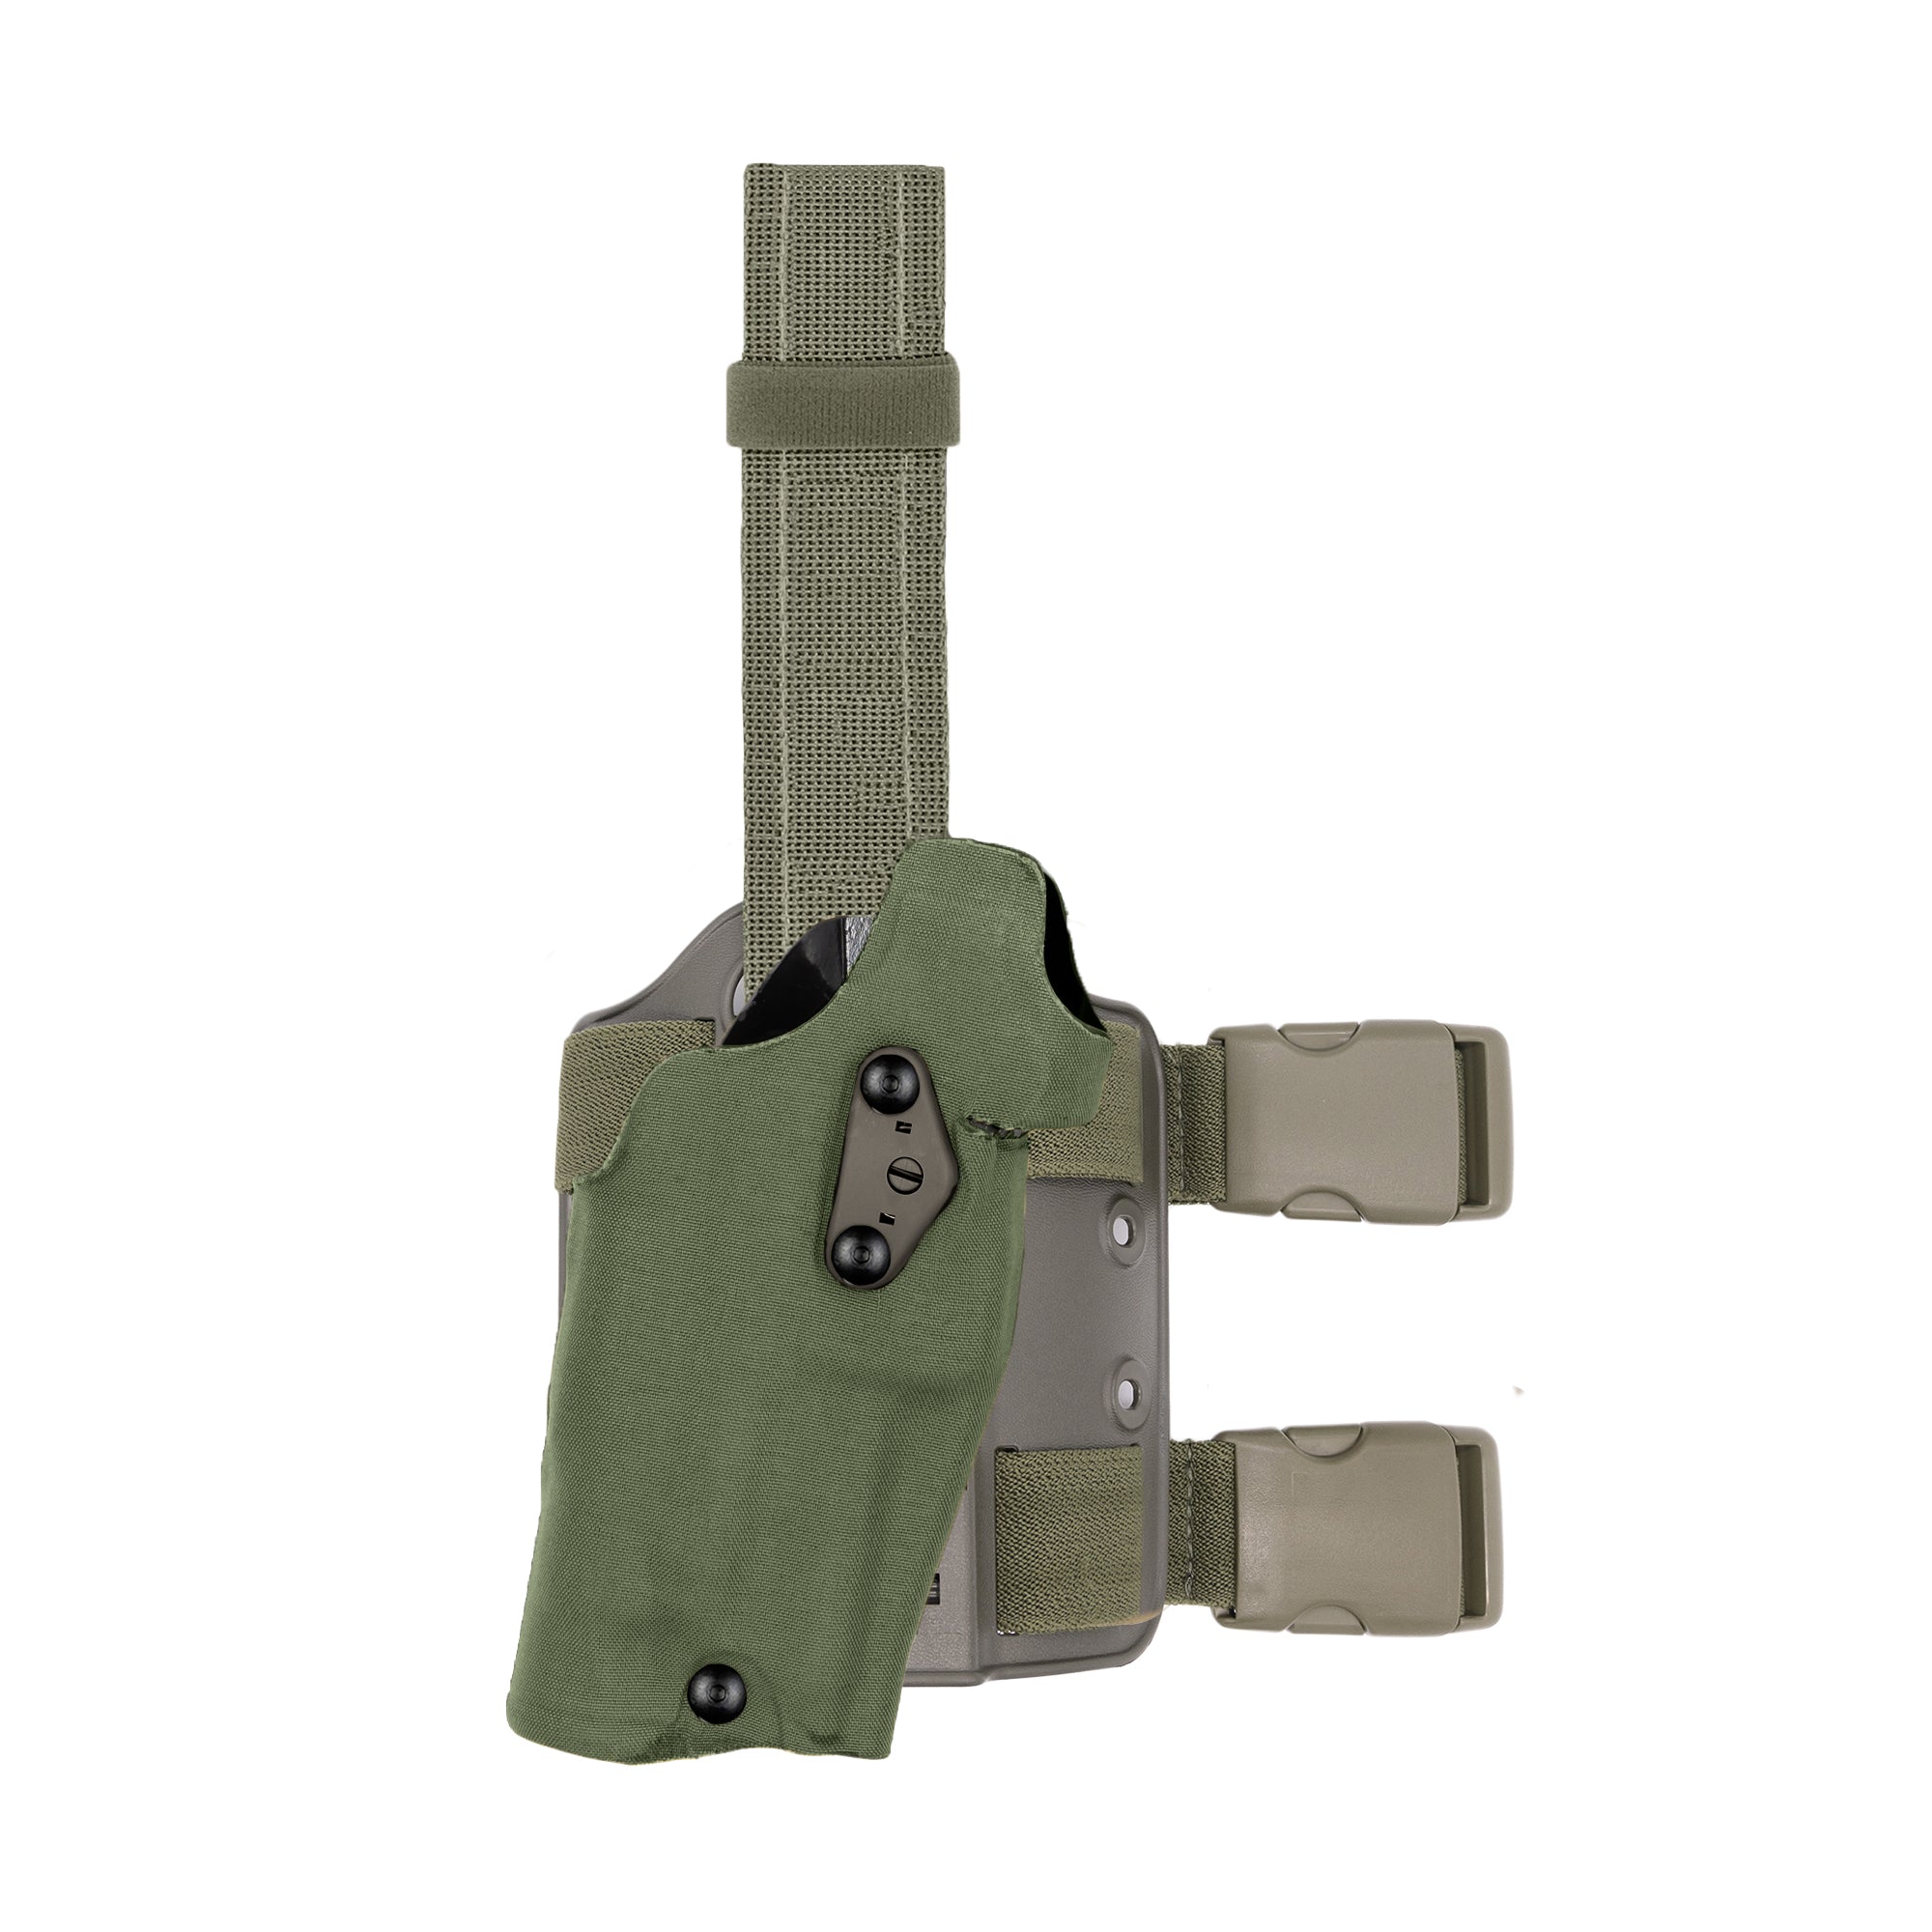  Safariland 6354 ALS Tactical Holster Without SLS